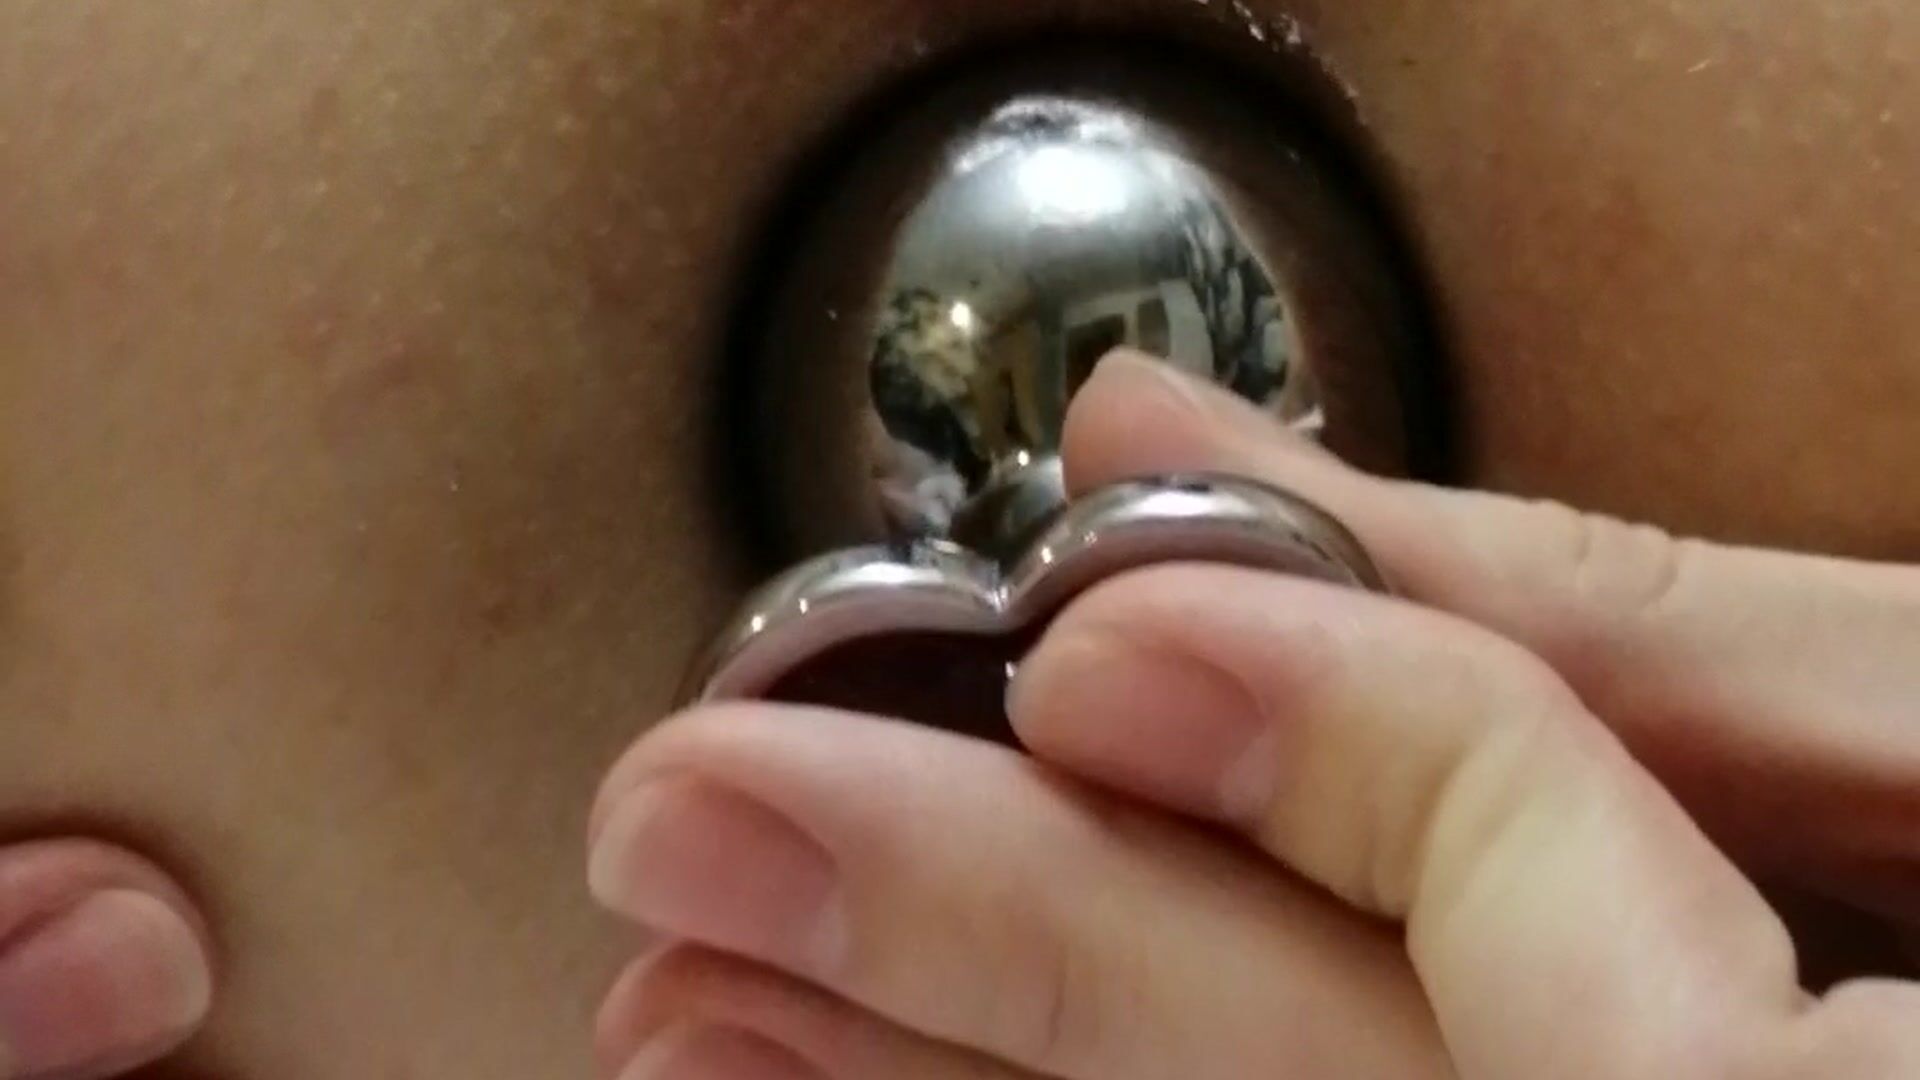 Play with pussy with anal plug close-up